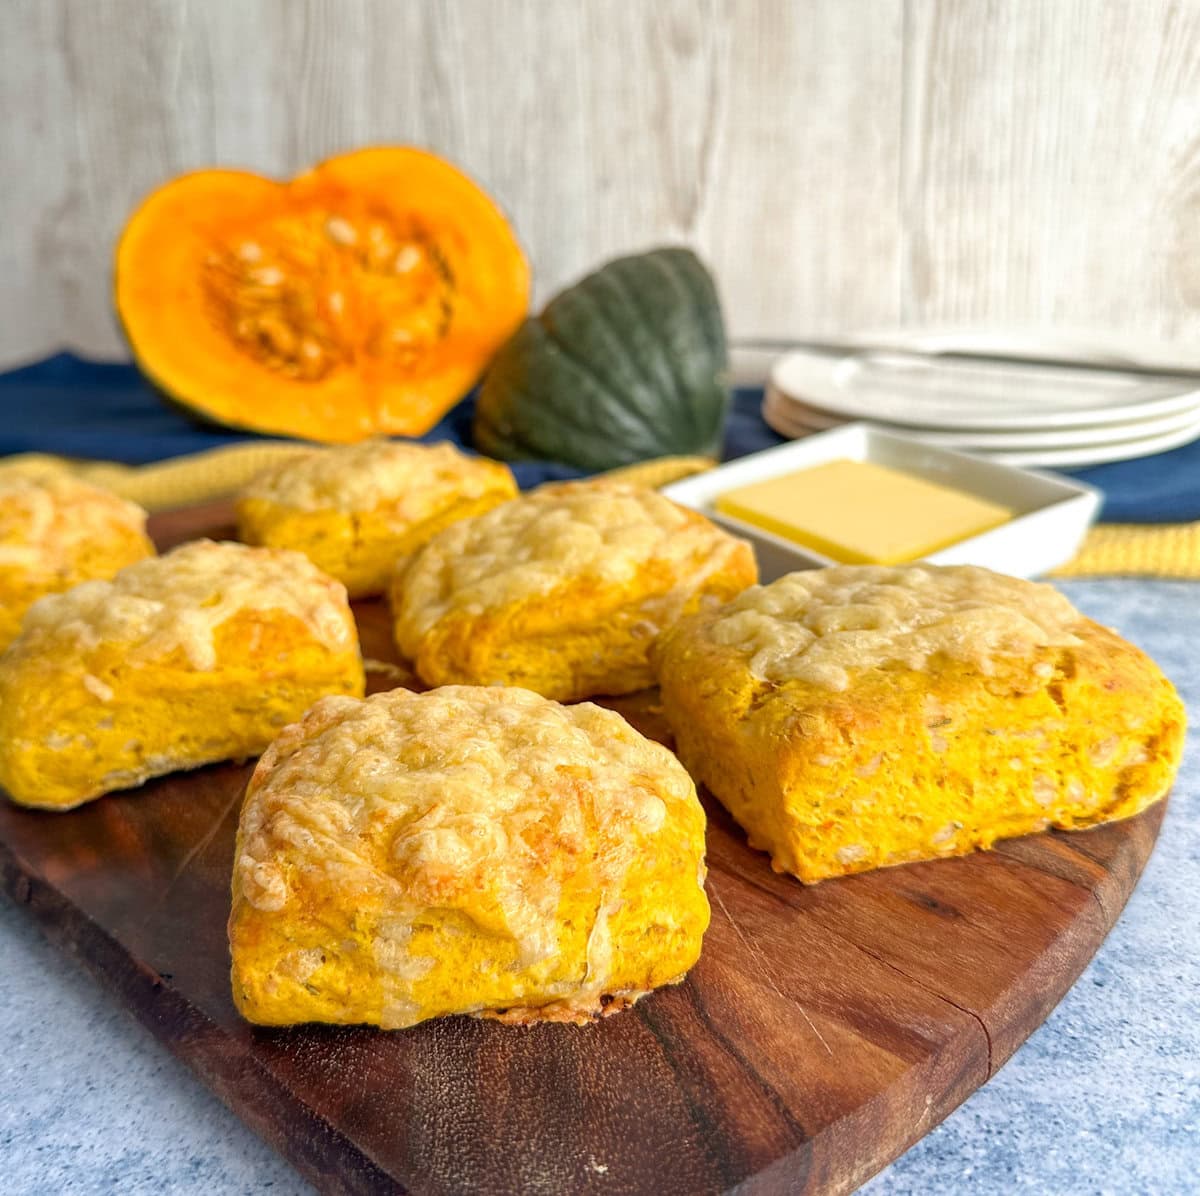 Pumpkin scones with cheese and herbs